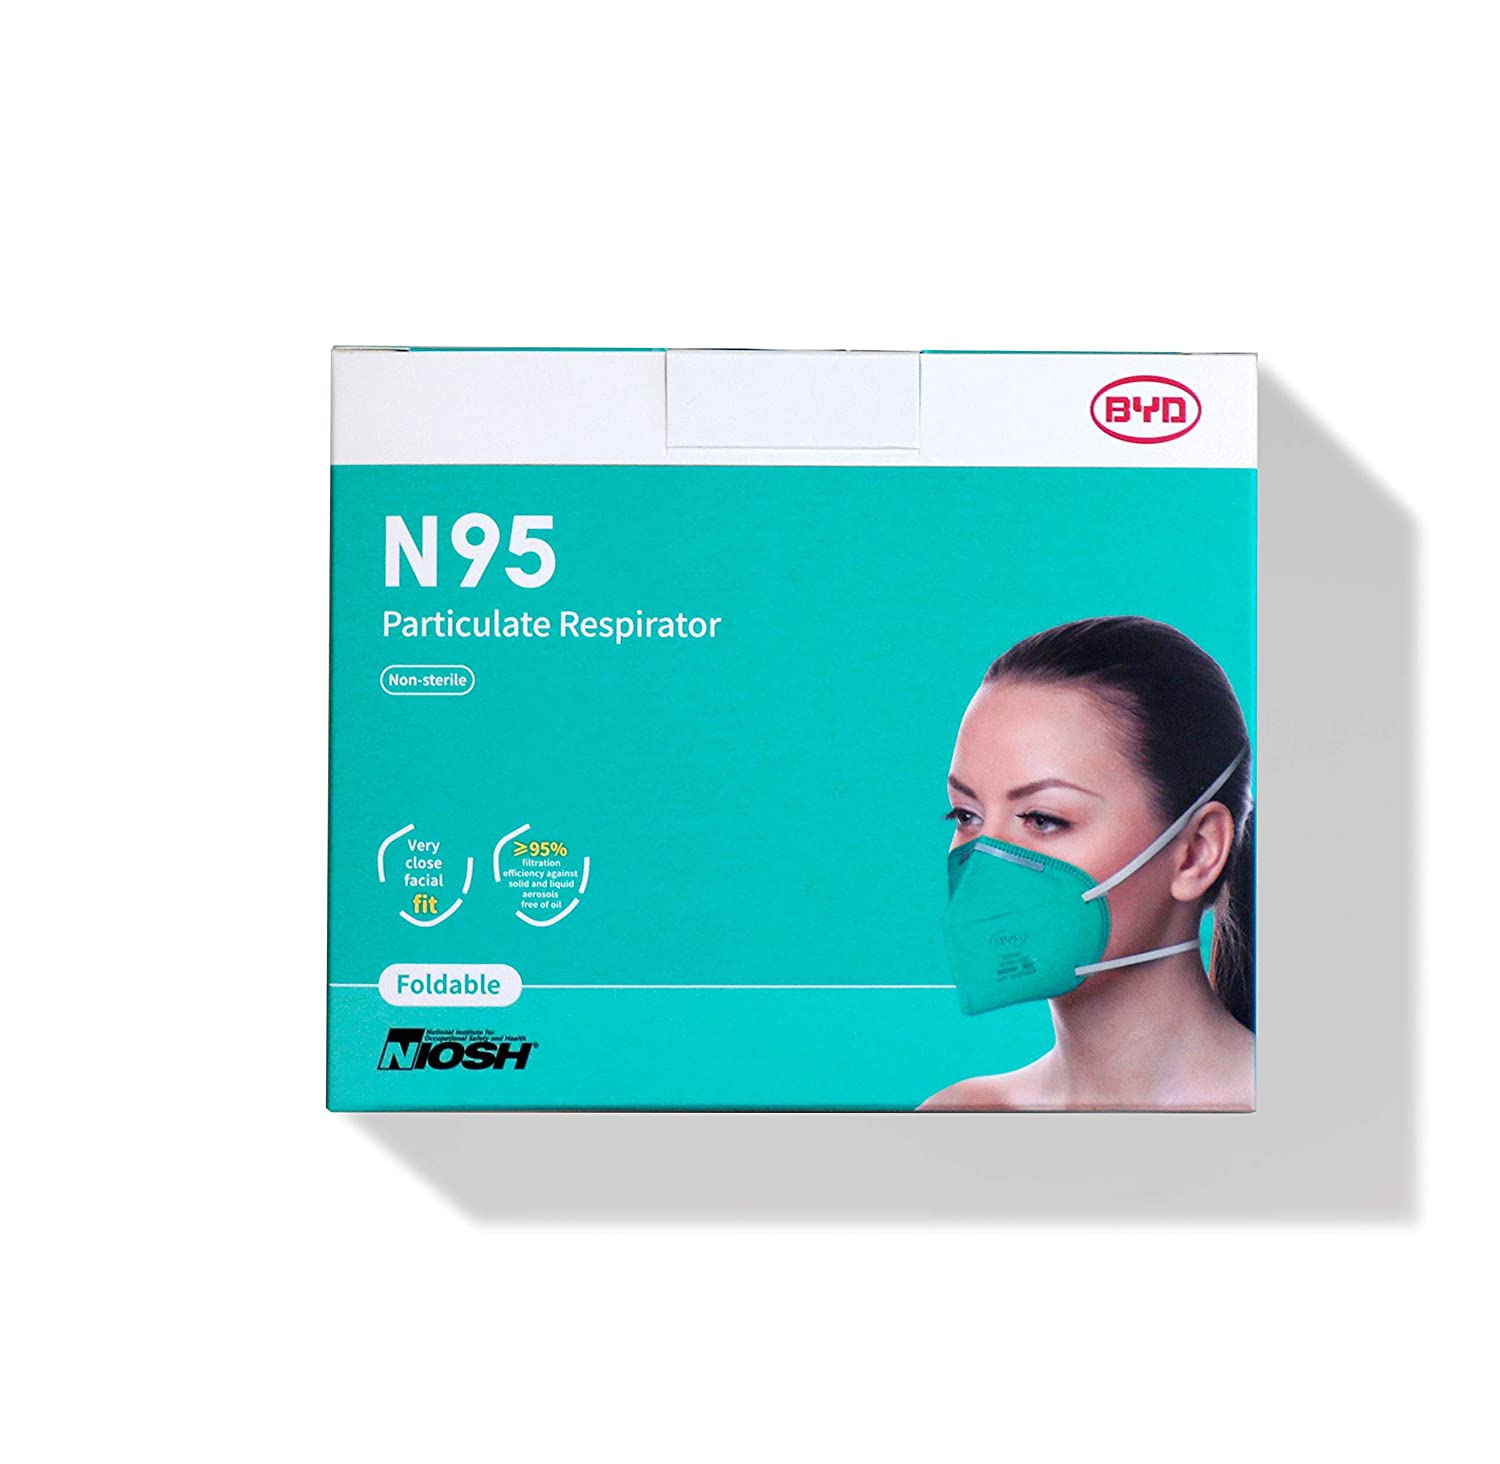 BYD CARE N95 Mask, 20 Pack with Individual Wrap (Pack of 20) $5.33